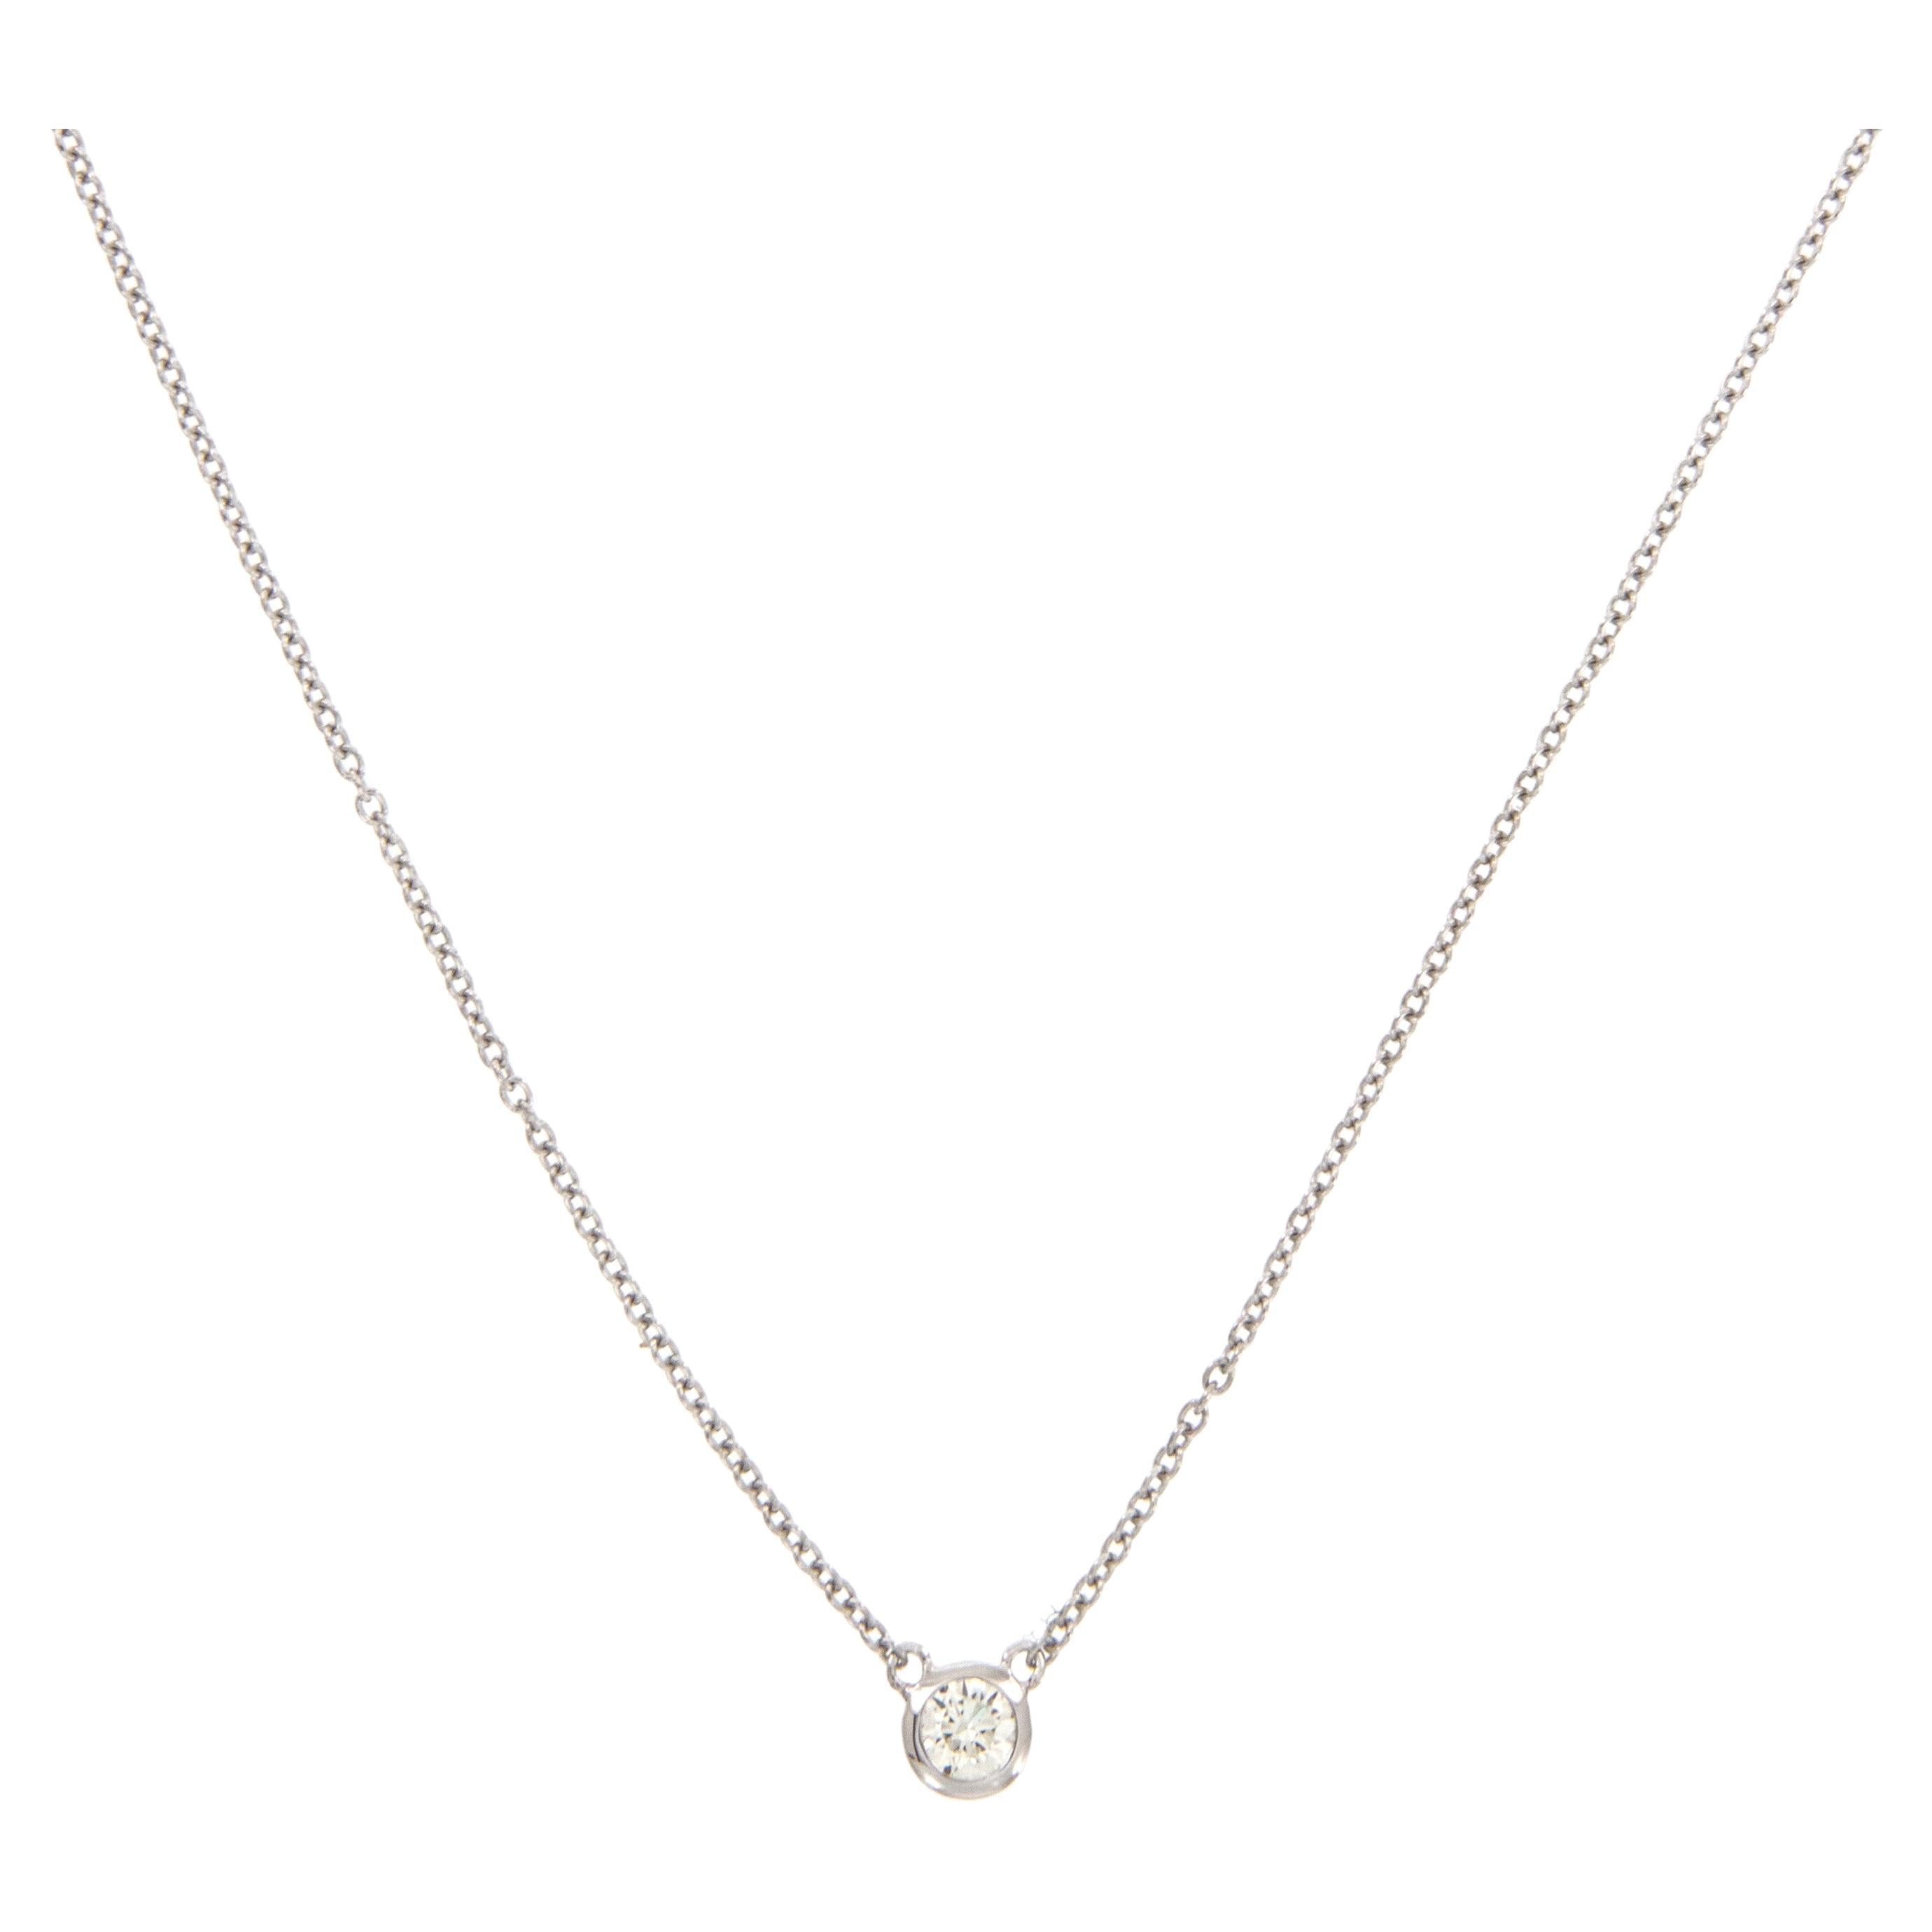 If you are looking for the one necklace you put on & never have to take off - look no further! This is the necklace for you- crafted from 18 karat white gold with one round brilliant diamond = 0.10 Carat  VS clarity and G color bezel set in the